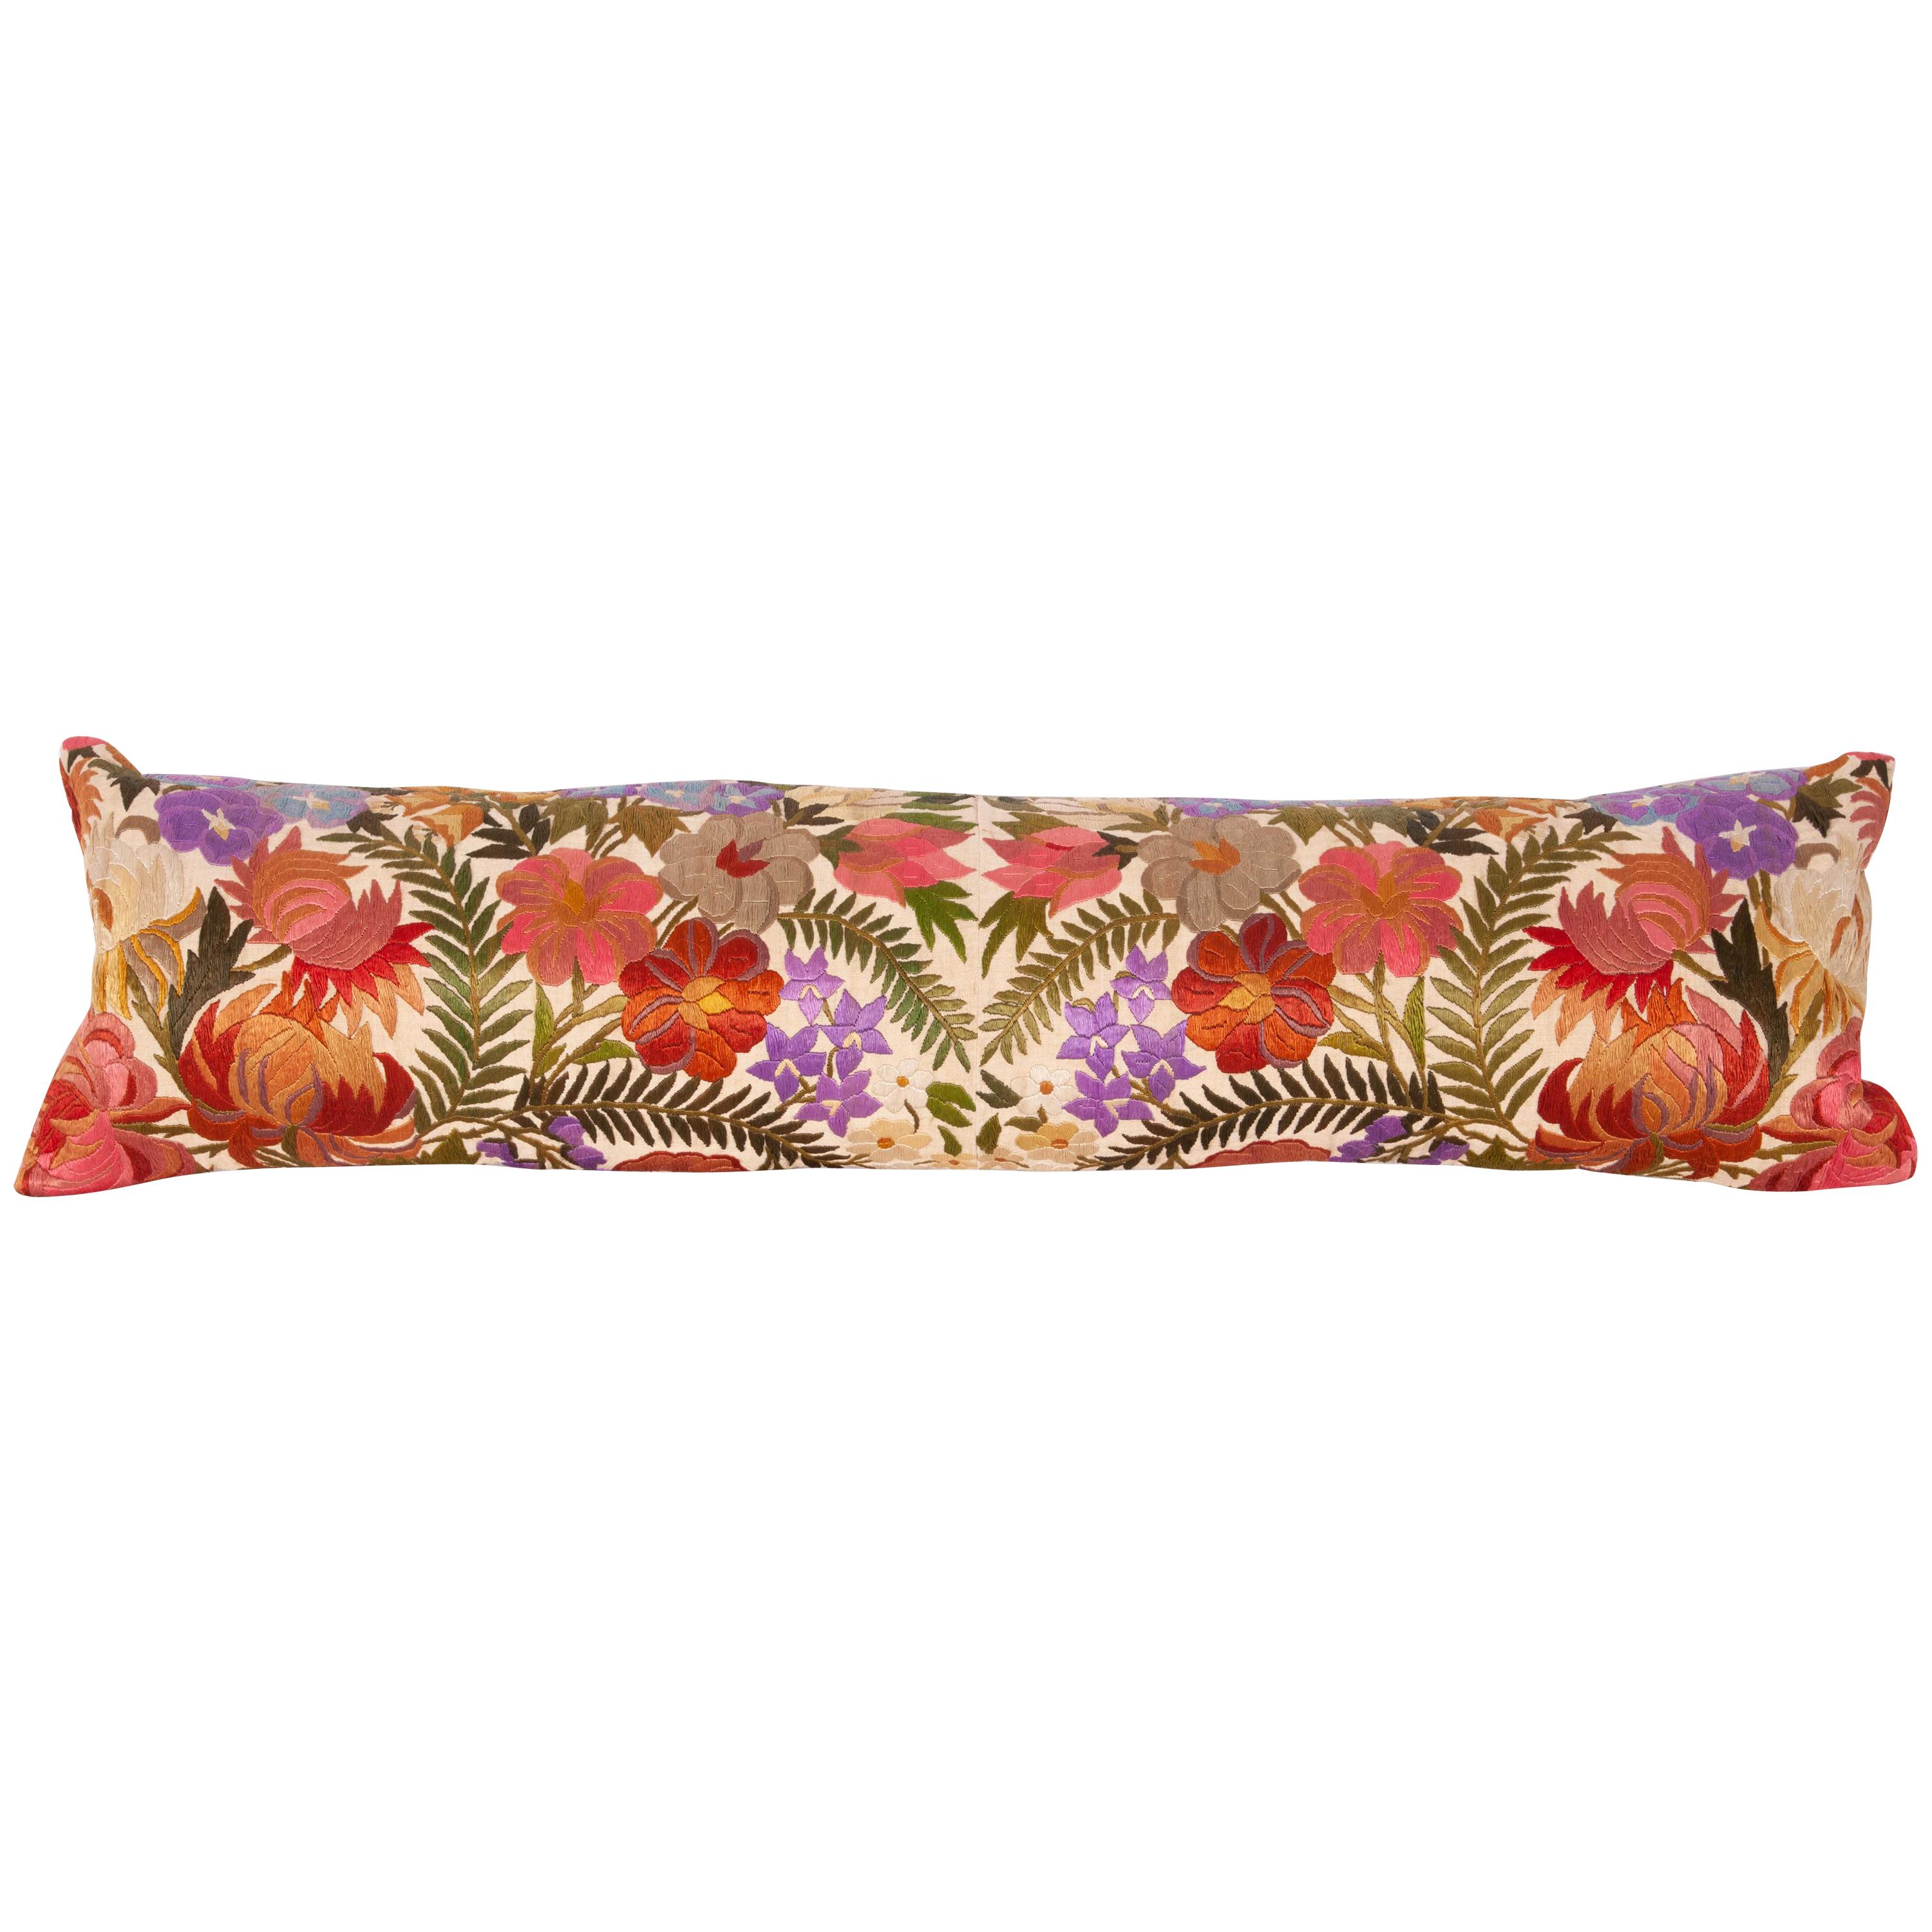 Lumbar Pillow Case Fashioned from an Early 20th Century Indian Embroidery